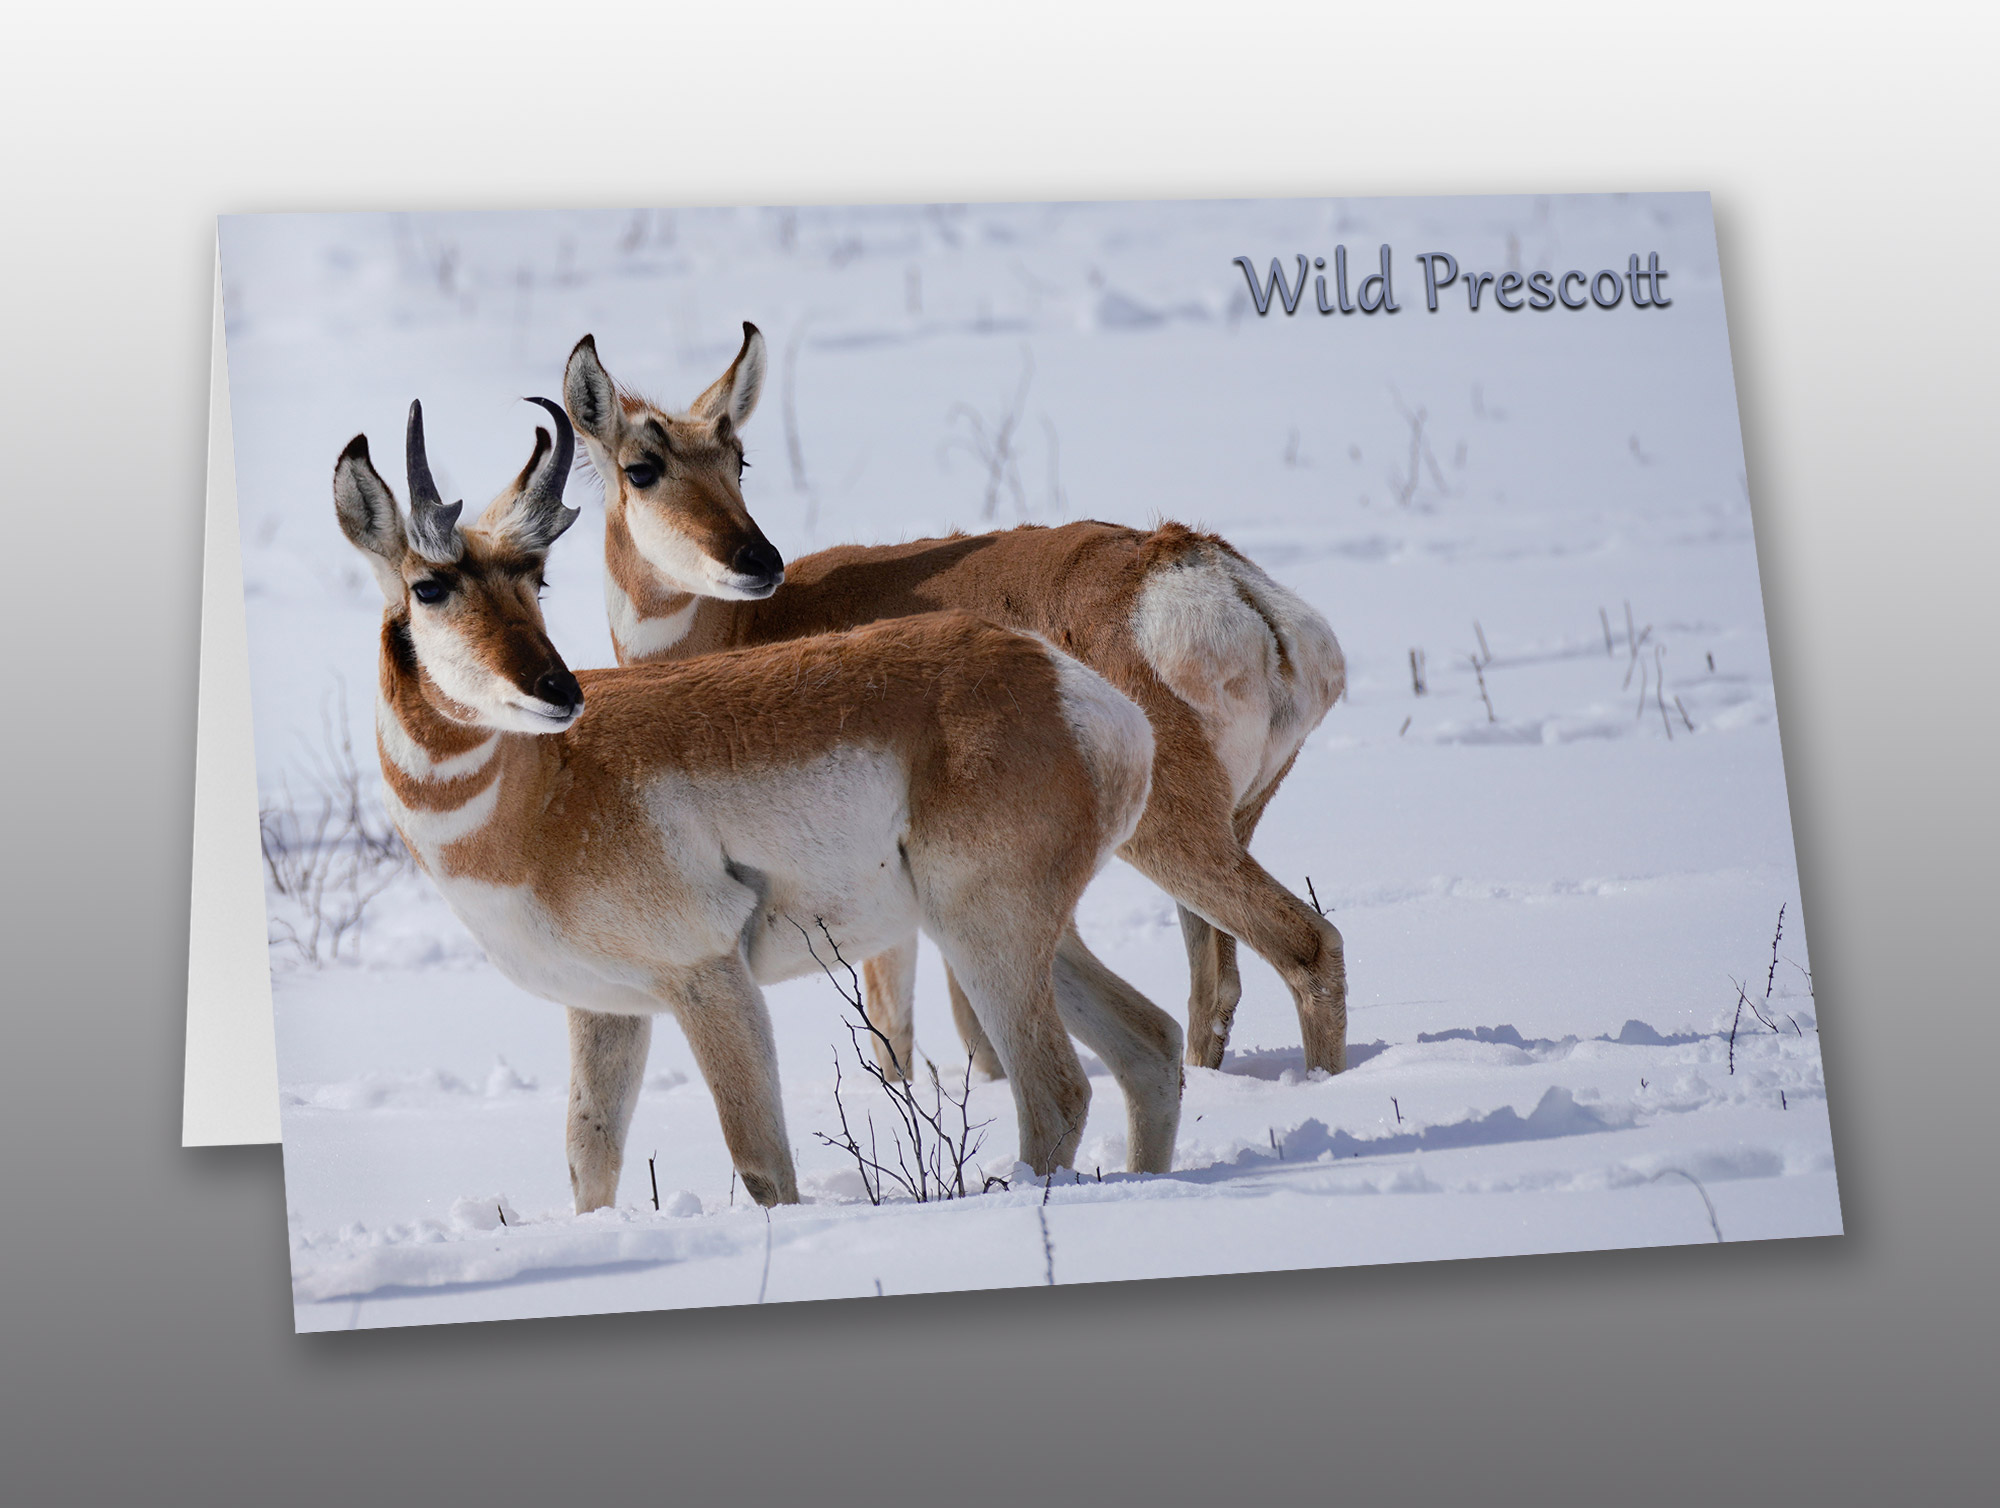 pronghorn antelope in snow - Moment of Perception Photography